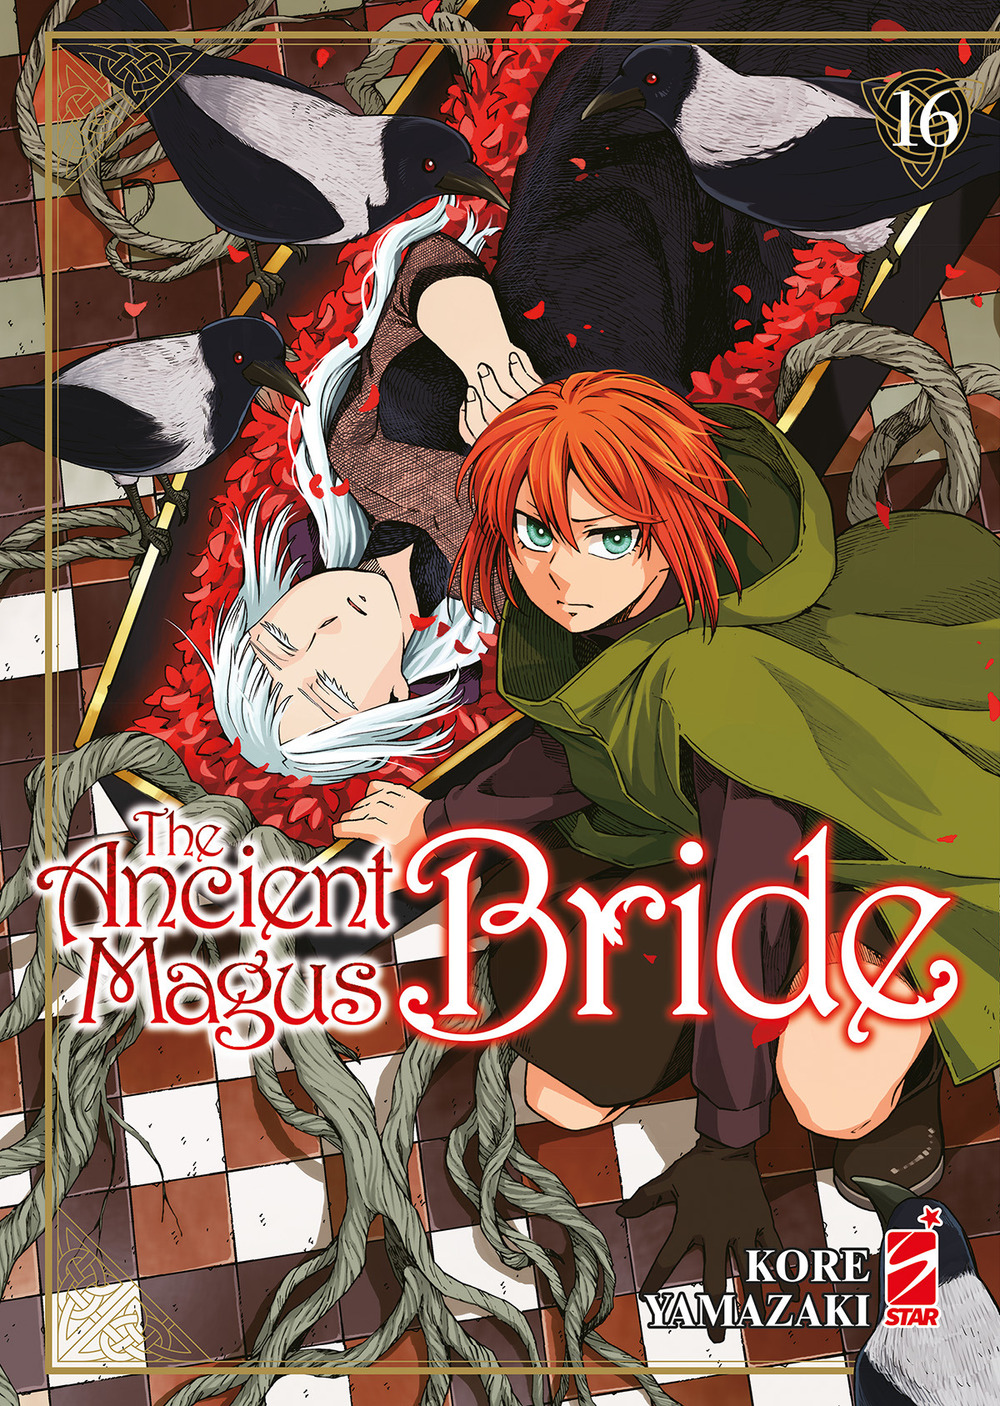 THE ANCIENT MAGUS BRIDE N. 16